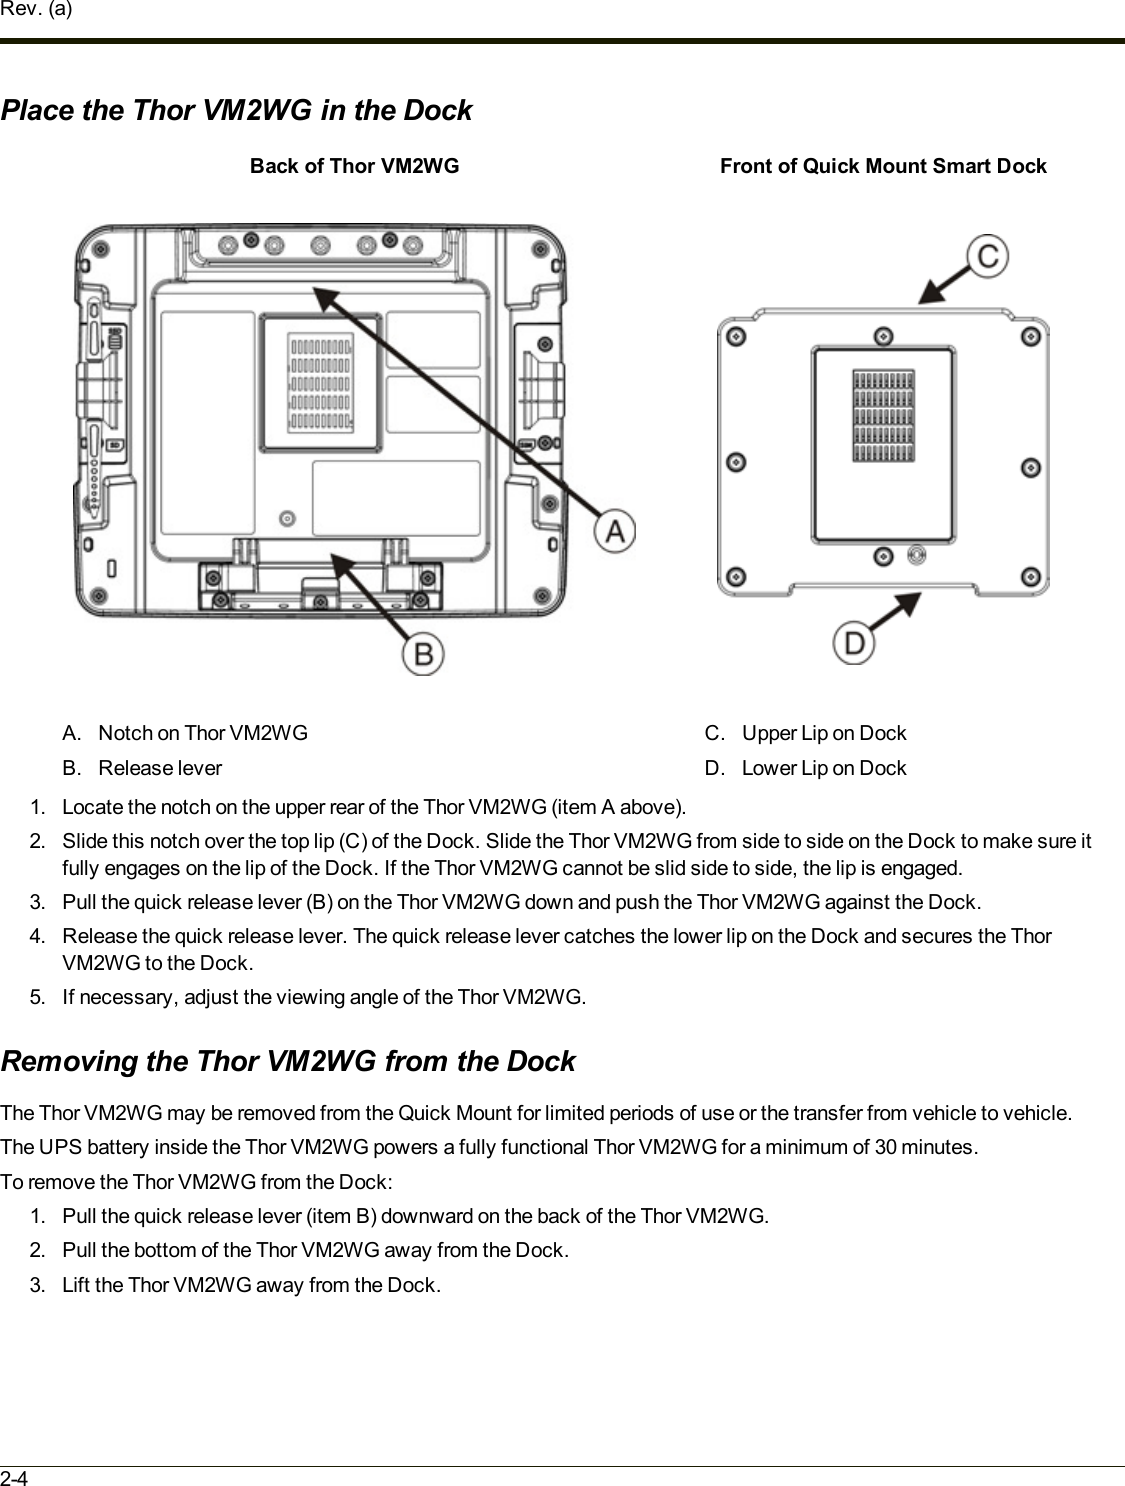 Rev. (a)Place the Thor VM2WG in the DockBack of Thor VM2WG Front of Quick Mount Smart DockA. Notch on Thor VM2WGB. Release leverC. Upper Lip on DockD. Lower Lip on Dock1. Locate the notch on the upper rear of the Thor VM2WG (item A above).2. Slide this notch over the top lip (C)of the Dock. Slide the Thor VM2WG from side to side on the Dock to make sure itfully engages on the lip of the Dock. If the Thor VM2WG cannot be slid side to side, the lip is engaged.3. Pull the quick release lever (B) on the Thor VM2WG down and push the Thor VM2WG against the Dock.4. Release the quick release lever. The quick release lever catches the lower lip on the Dock and secures the ThorVM2WG to the Dock.5. If necessary, adjust the viewing angle of the Thor VM2WG.Removing the Thor VM2WG from the DockThe Thor VM2WG may be removed from the Quick Mount for limited periods of use or the transfer from vehicle to vehicle.The UPS battery inside the Thor VM2WG powers a fully functional Thor VM2WG for a minimum of 30 minutes.To remove the Thor VM2WG from the Dock:1. Pull the quick release lever (item B) downward on the back of the Thor VM2WG.2. Pull the bottom of the Thor VM2WG away from the Dock.3. Lift the Thor VM2WG away from the Dock.2-4